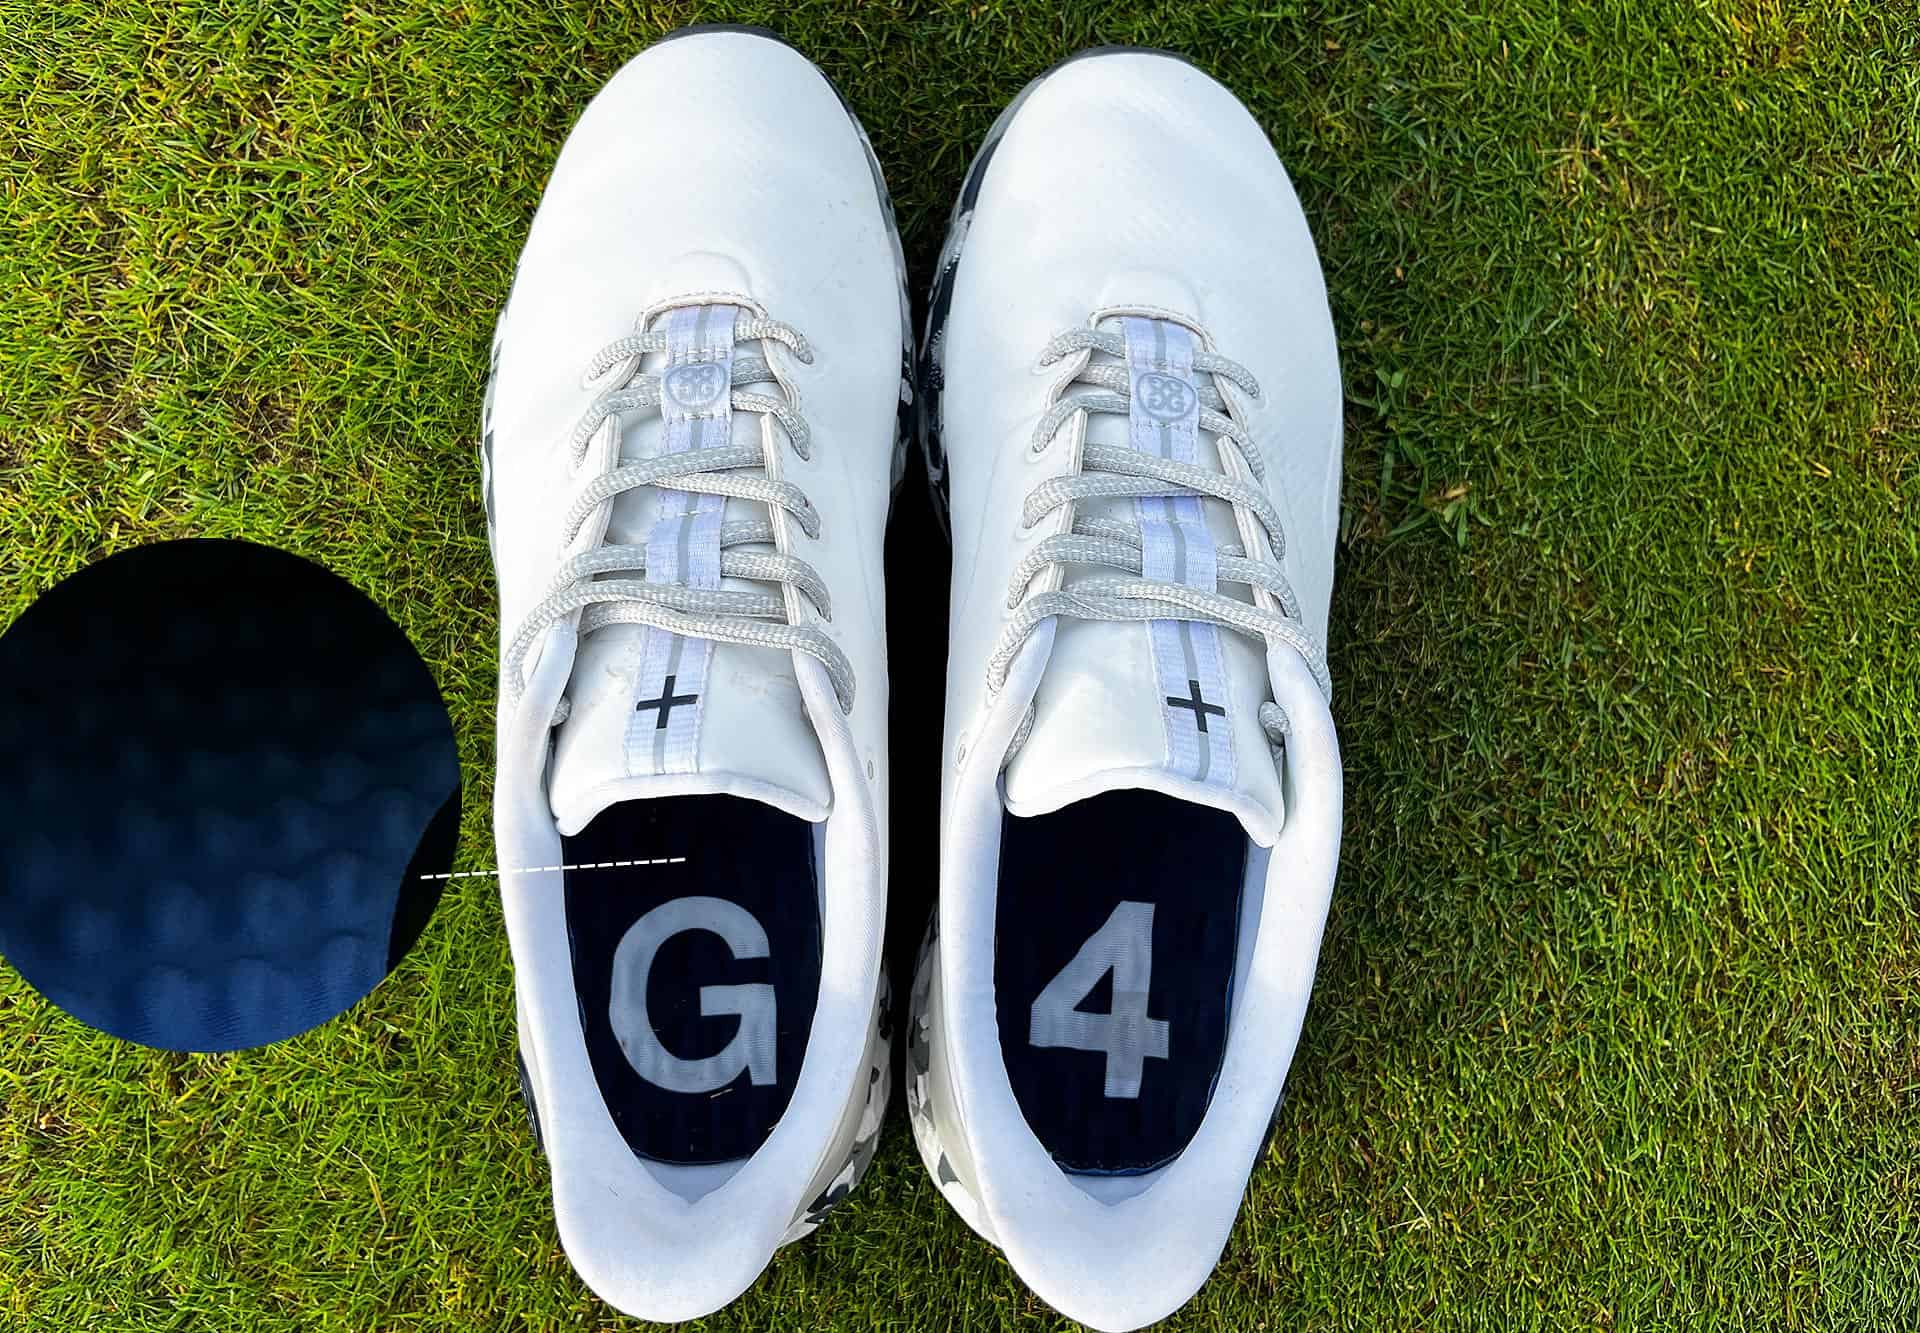 G Fore MG4+ golf shoes review